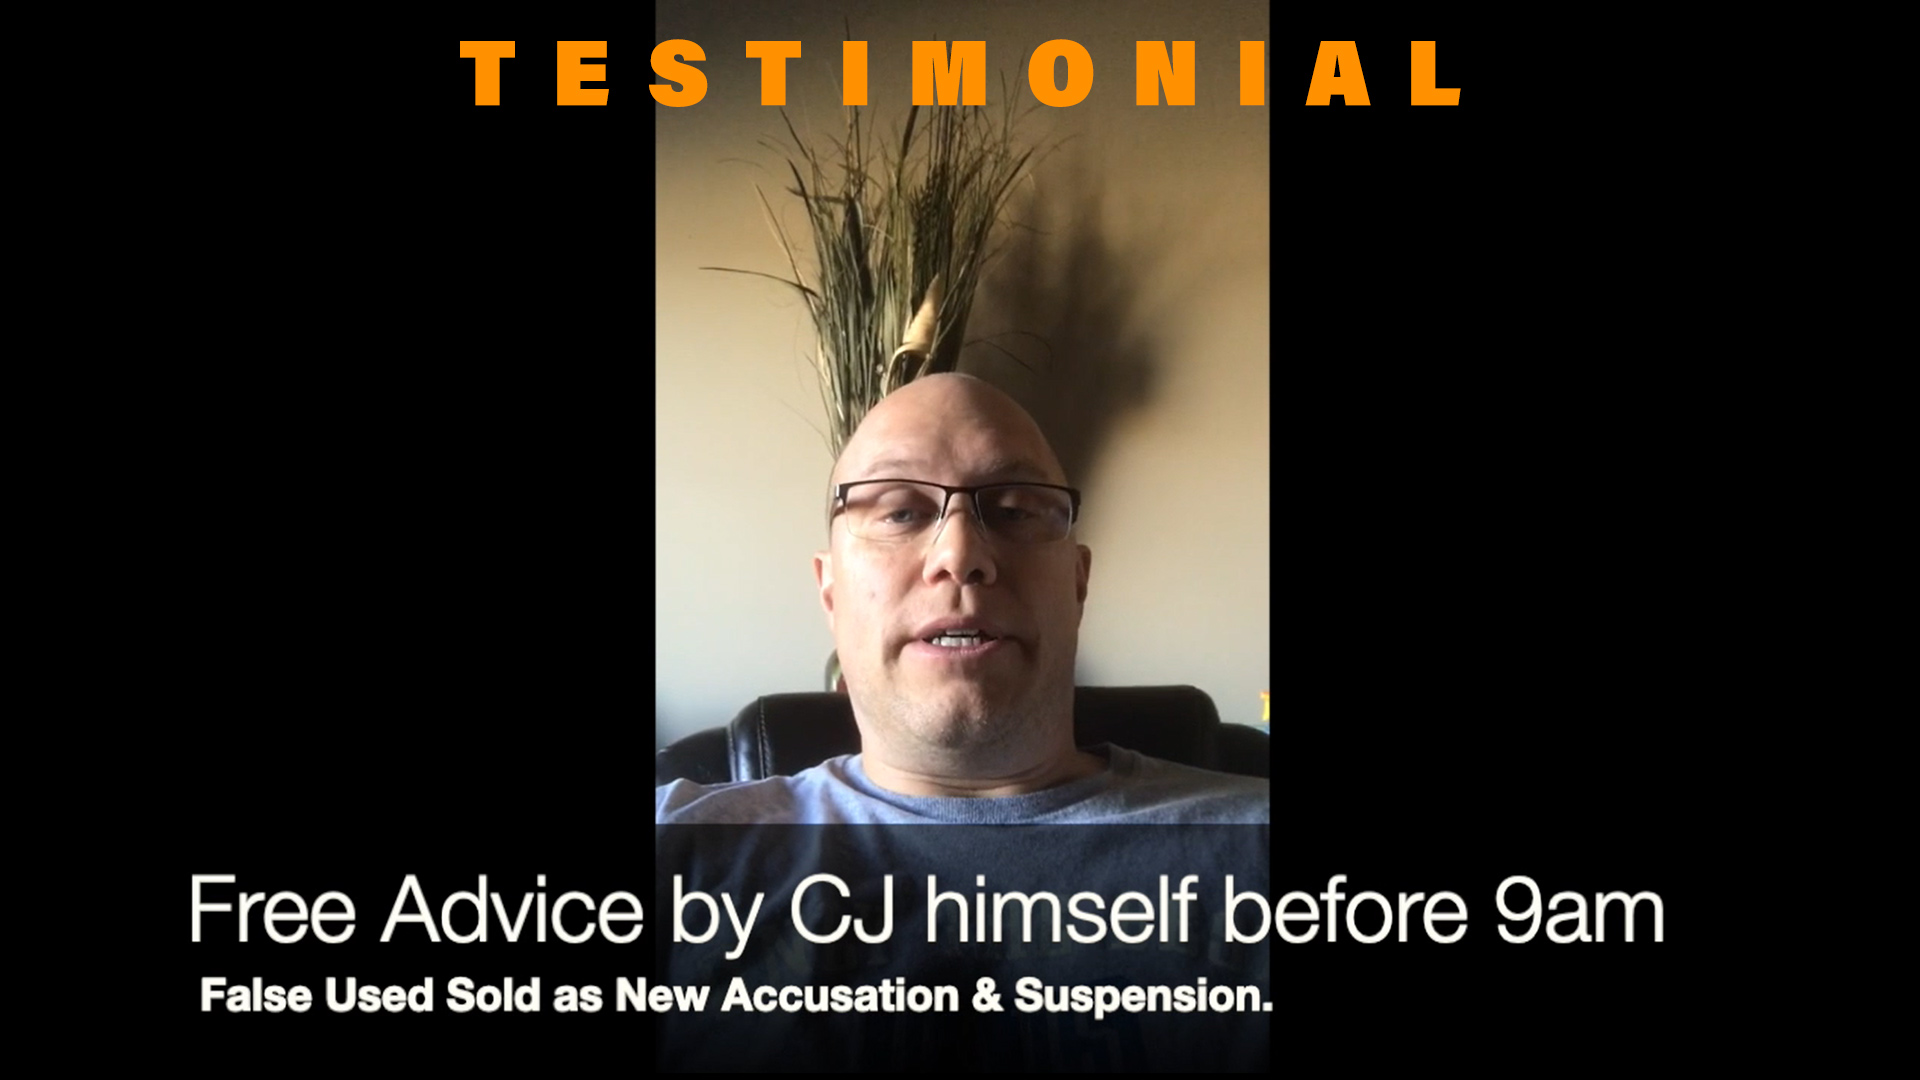 Testimonial - False Used Sold as New Accusation & No Charge